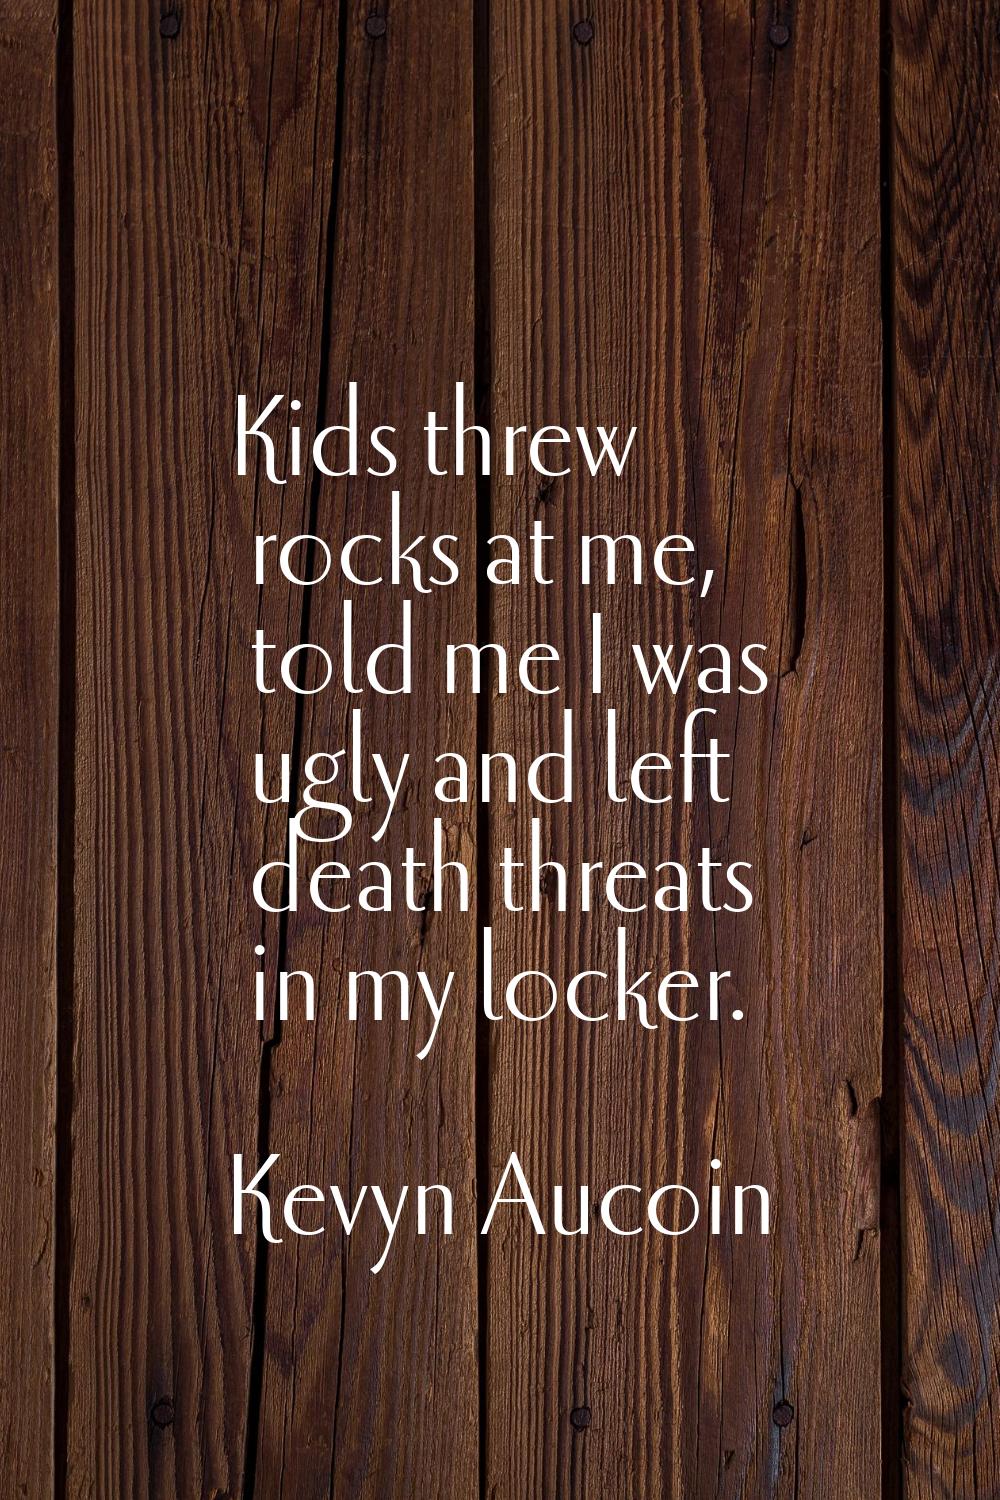 Kids threw rocks at me, told me I was ugly and left death threats in my locker.